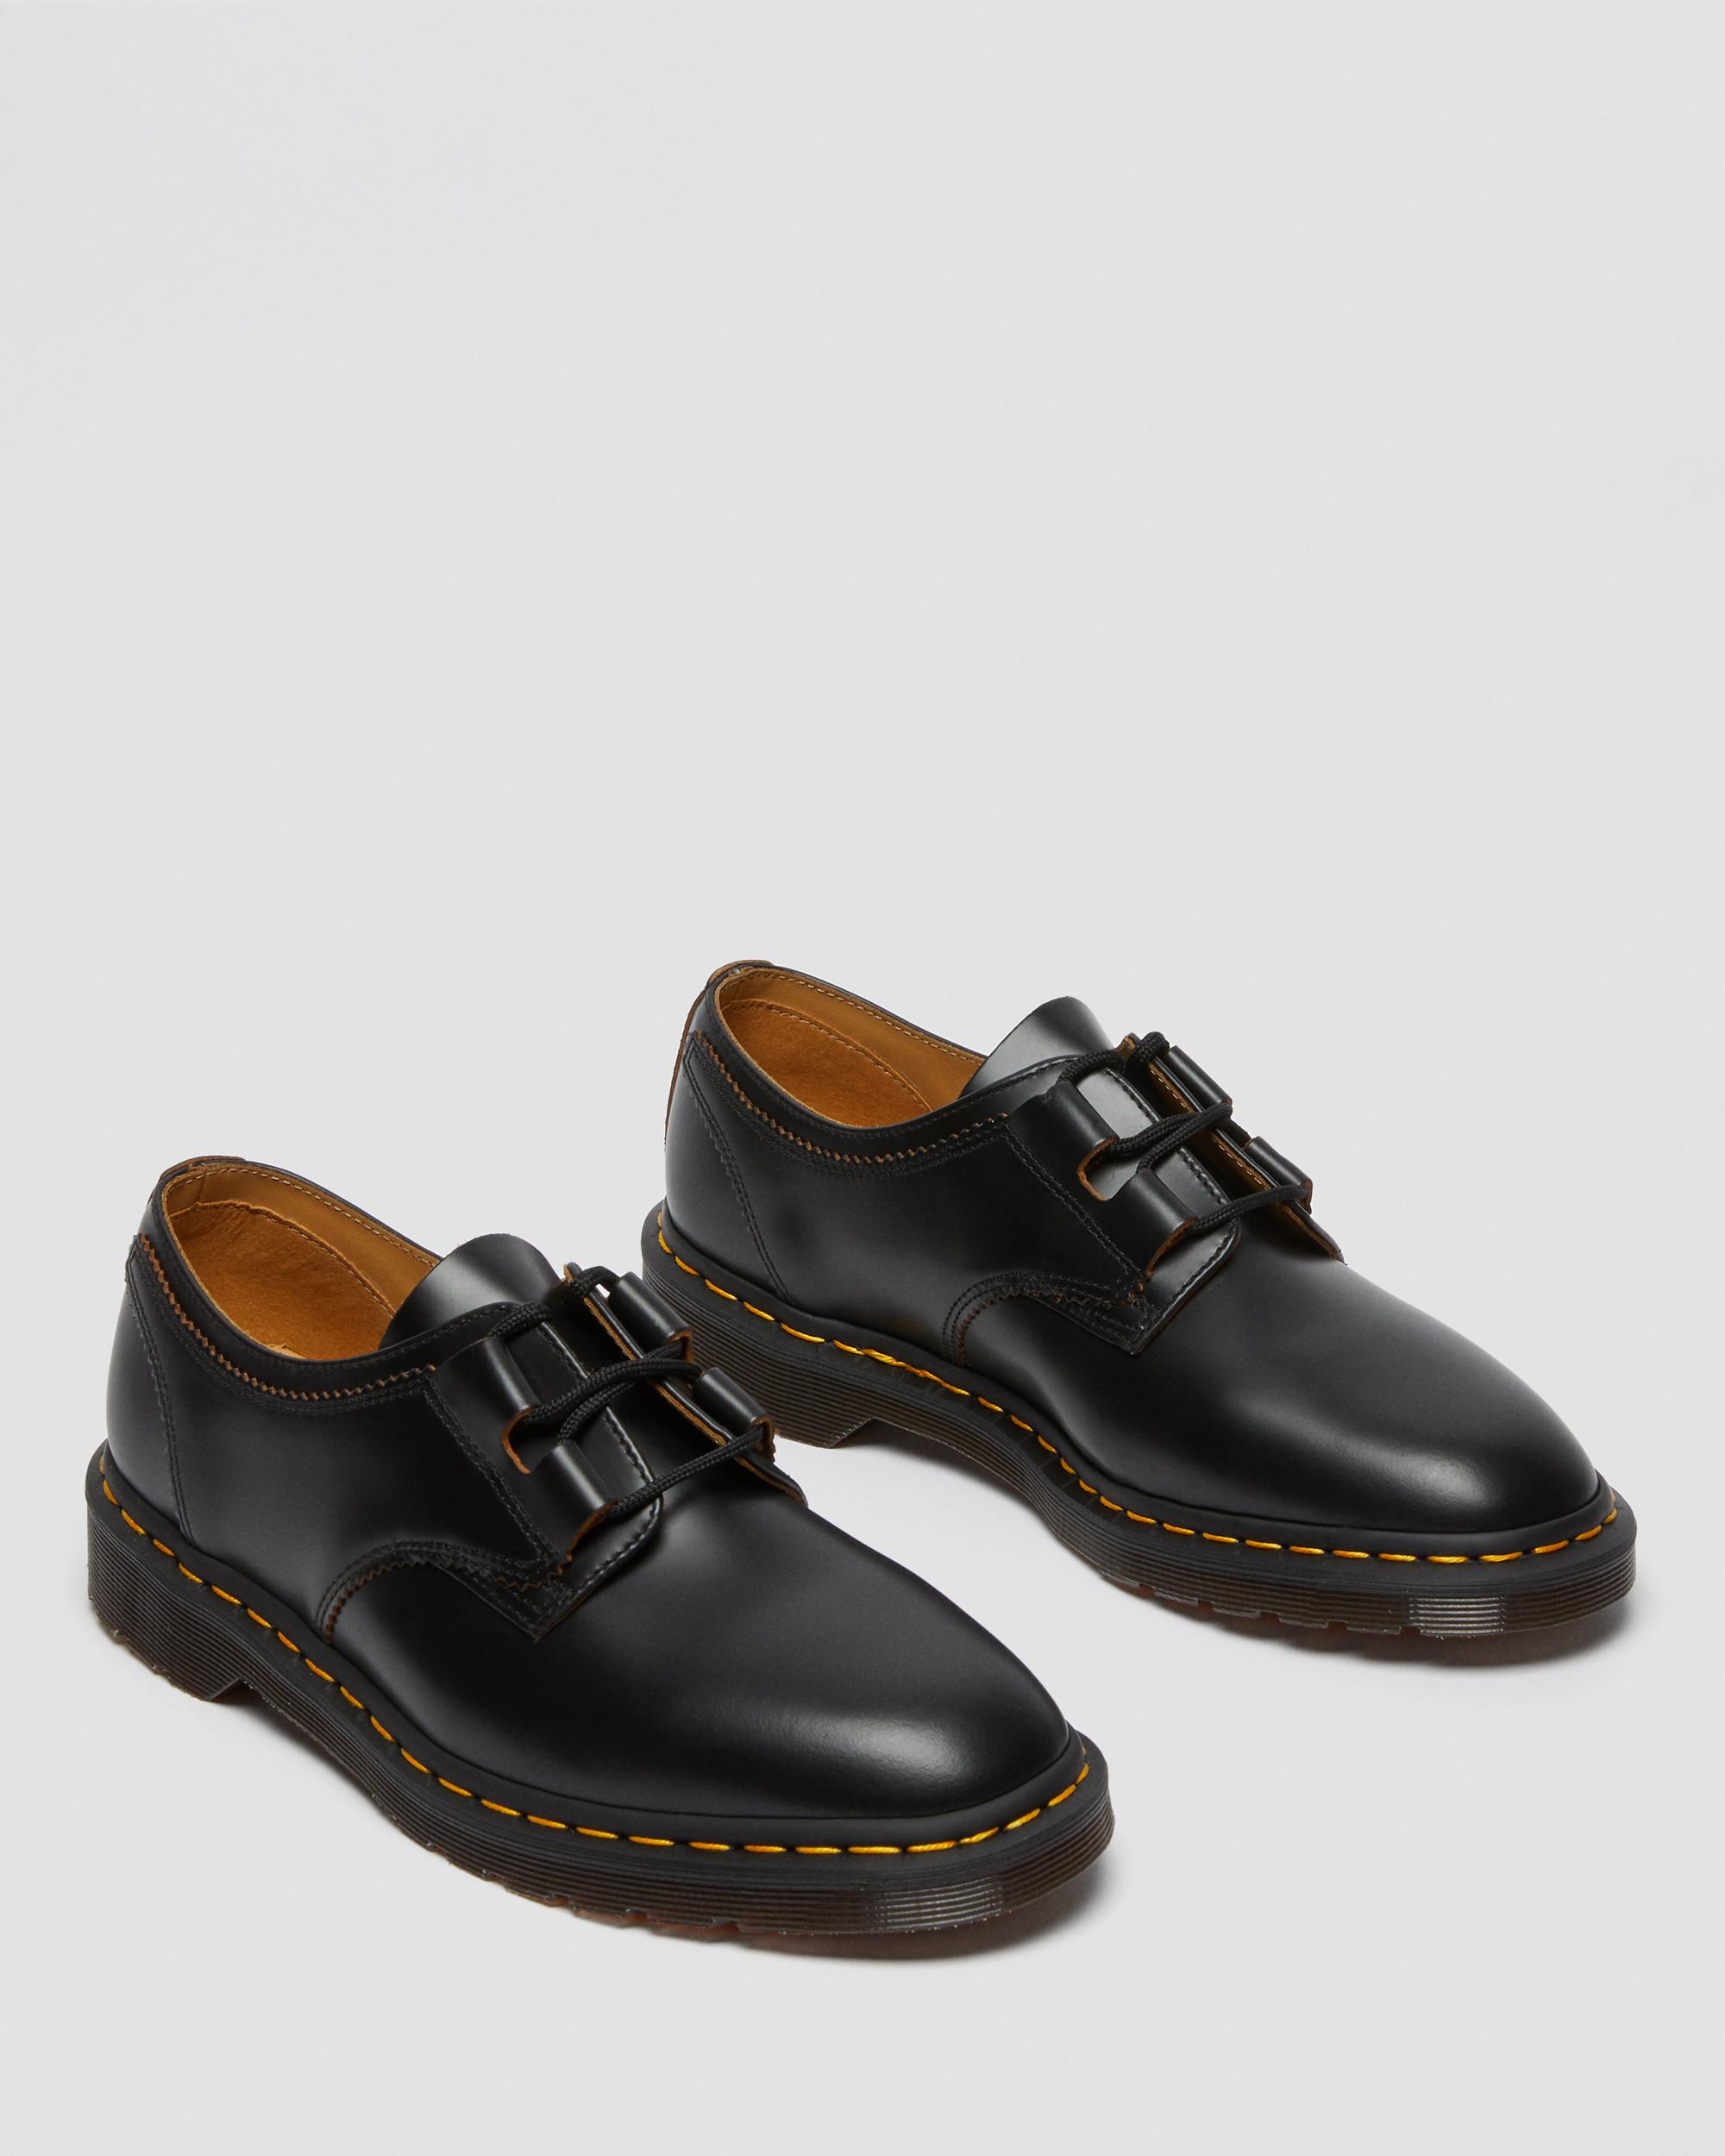 1461 Ghillie Leather Oxford Shoes1461 Ghillie Leather Oxford Shoes Dr. Martens